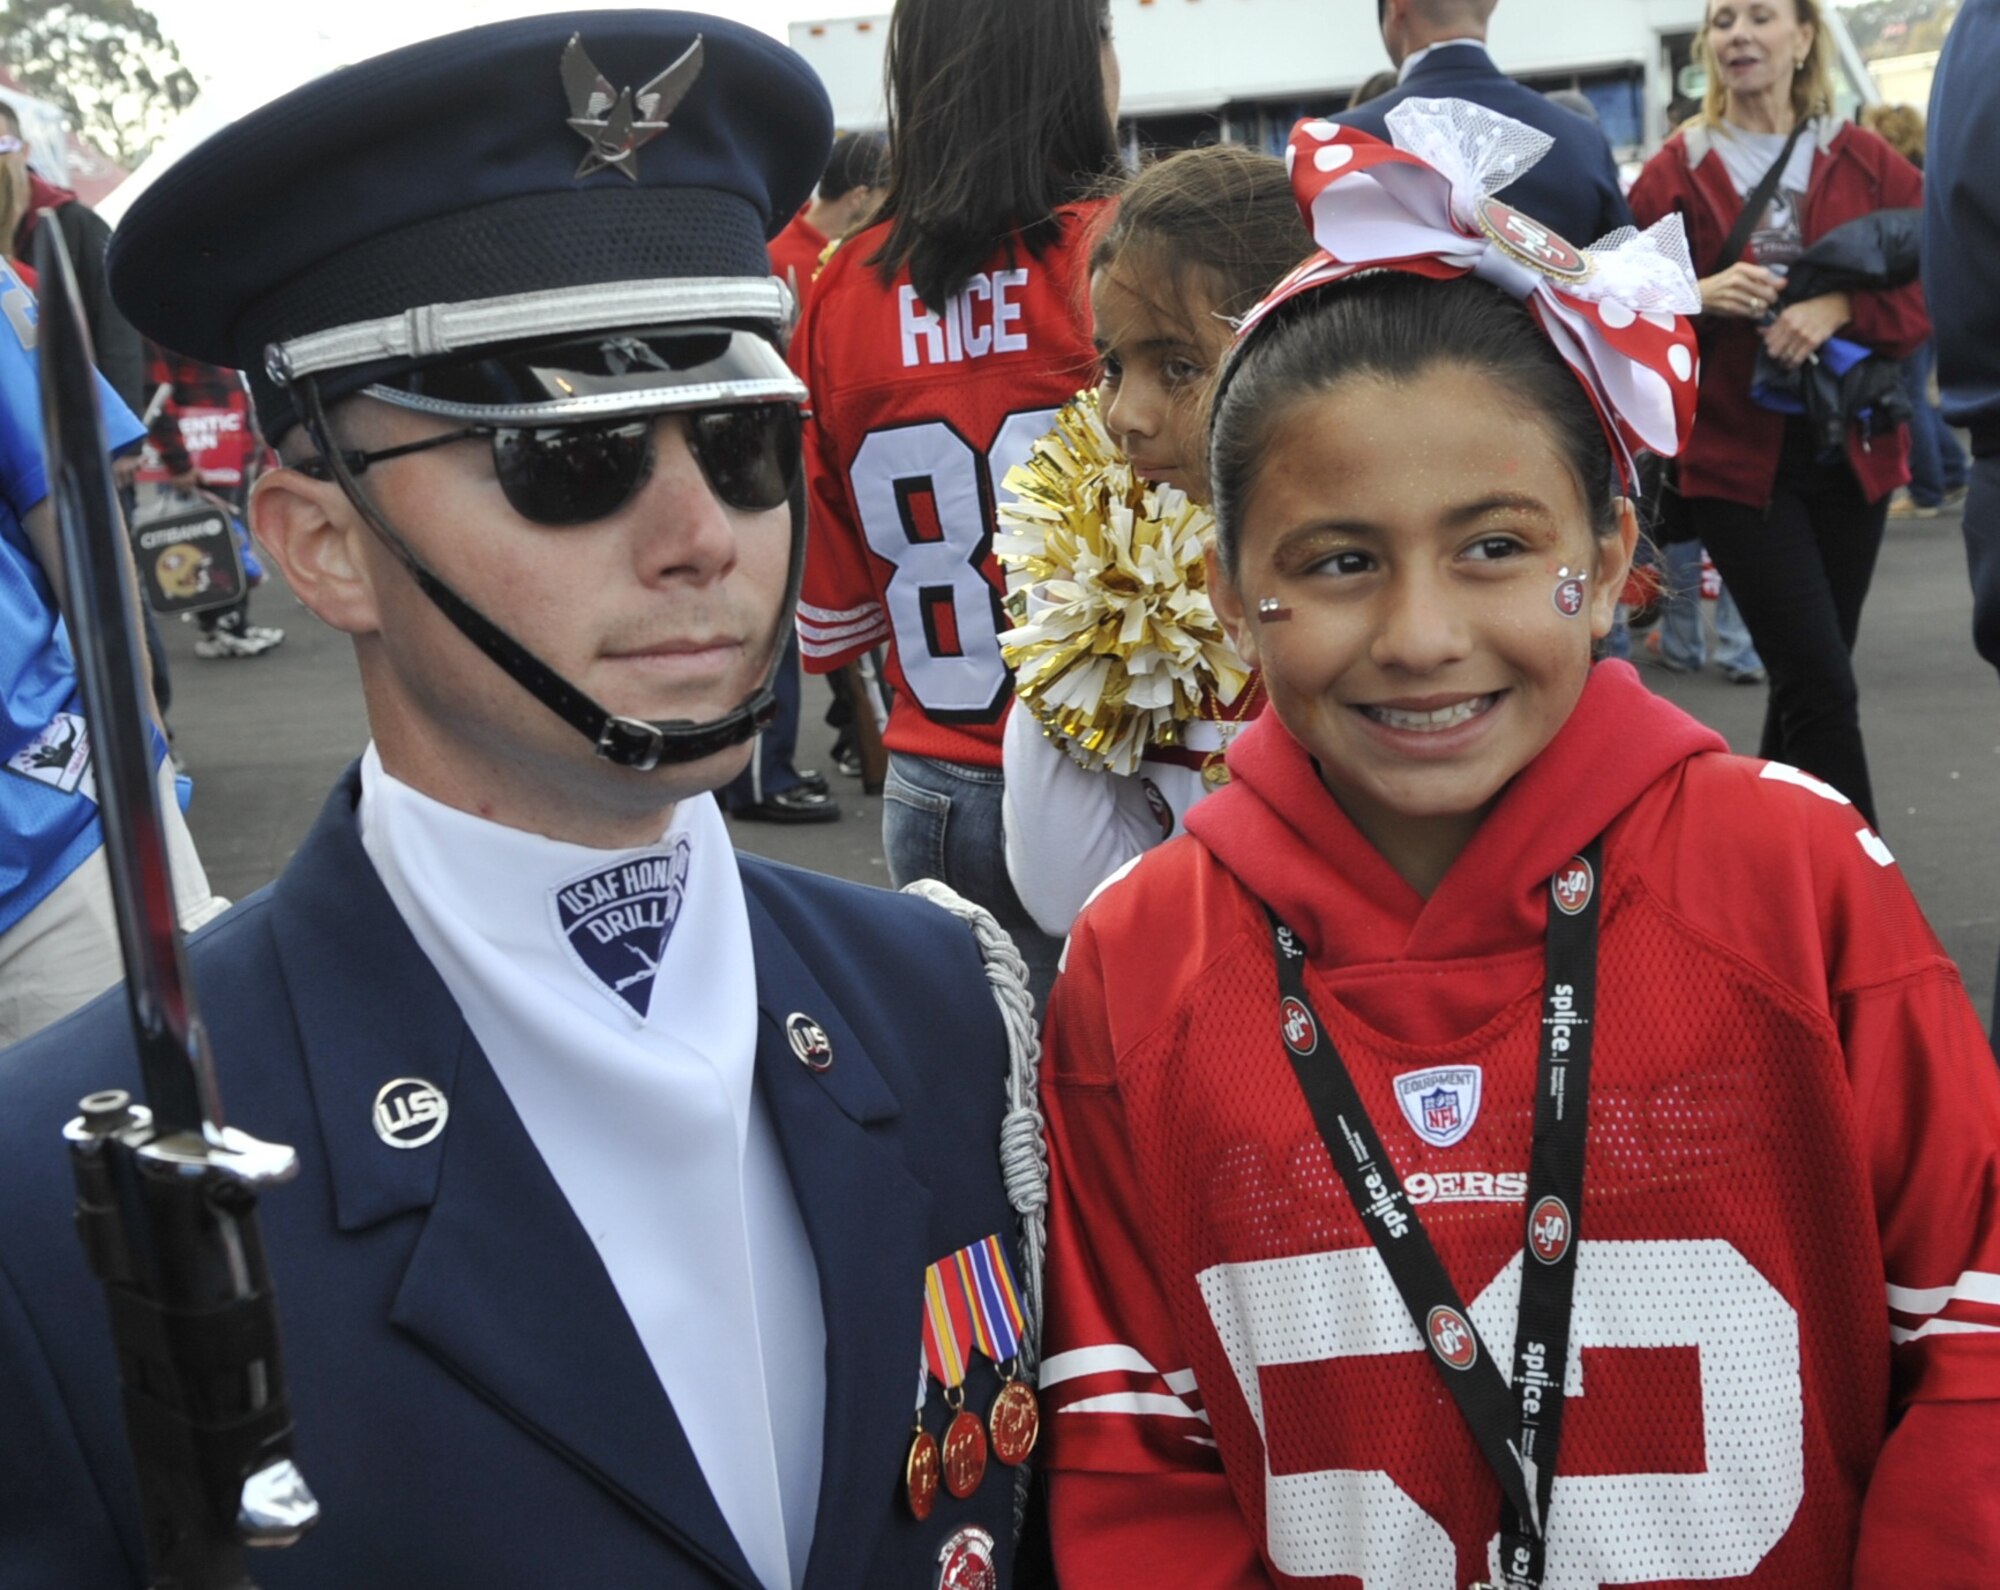 Senior Airman Andrew Winders, U.S. Air Force Honor Guard Drill Team member, poses with a fan following a pre-game performance at the Detroit Lions vs. San Francisco 49ers NFL football game at Candlestick Park in San Francisco, Calif., Sept. 16, 2012.  The Drill Team performed in front of more than 500 people before the game and stood on the field during the National Anthem in front of a sold-out crowd.  (U.S. Air Force photo by Senior Master Sgt. Adam M. Stump)